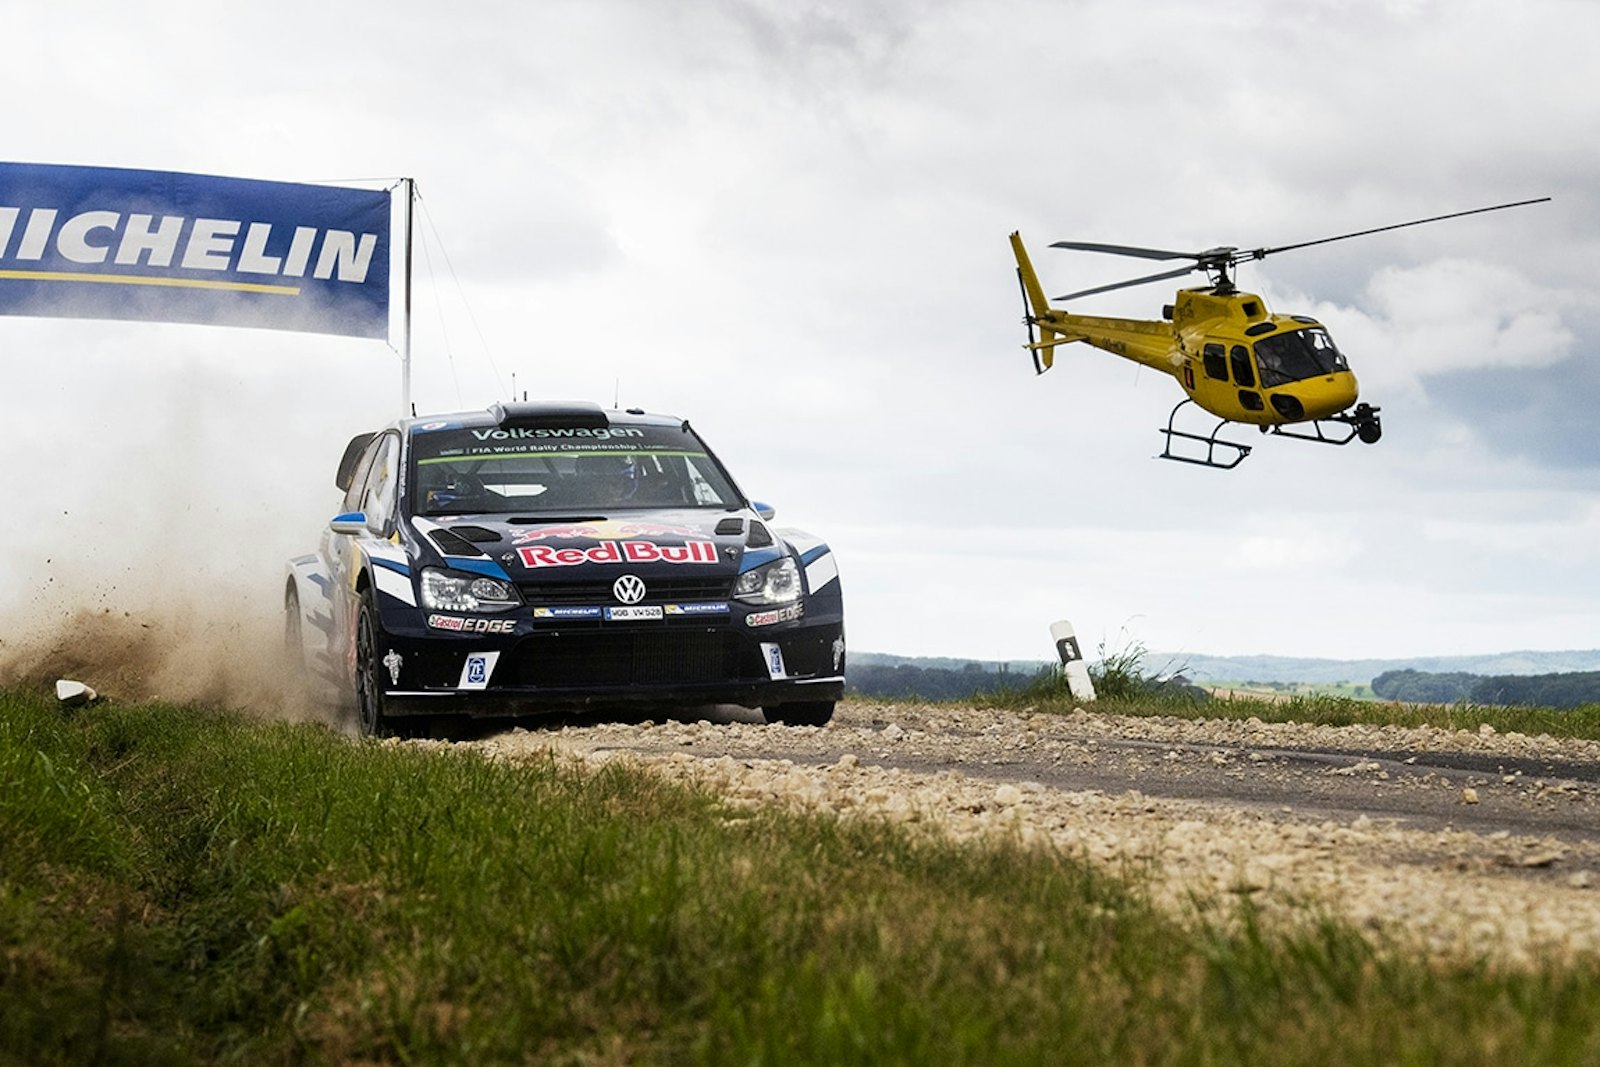 Sebastien Ogier (FRA) performs during the FIA World Rally Championship 2016 Germany in Trier, Germany on August 21, 2016 // Jaanus Ree/Red Bull Content Pool // P-20160821-00303 // Usage for editorial use only // Please go to www.redbullcontentpool.com for further information. //